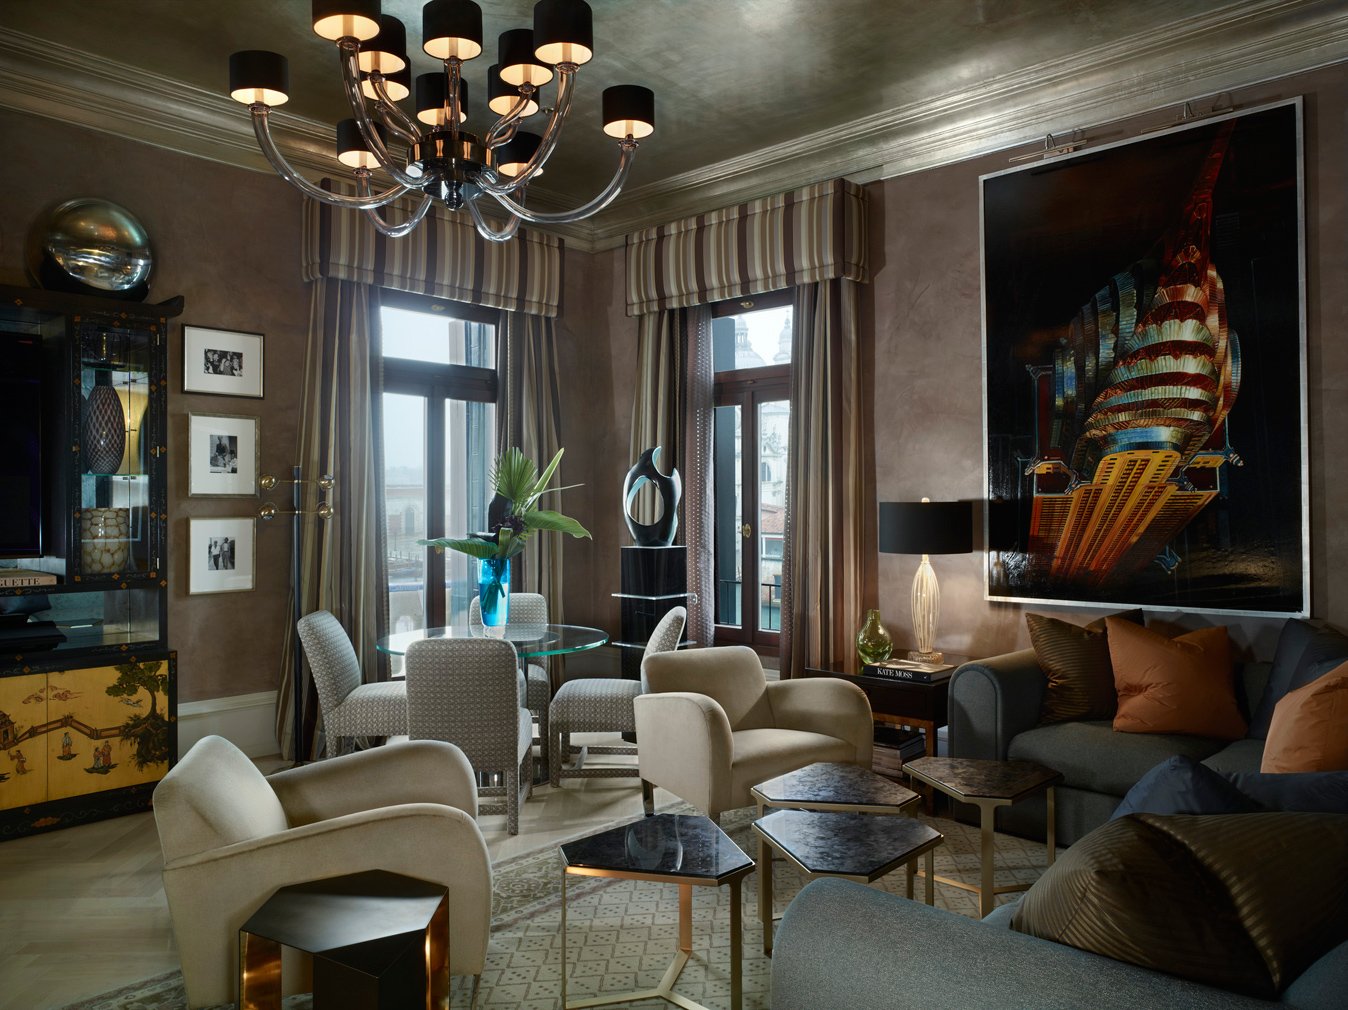 The Donghia Patron Grand Canal Suite